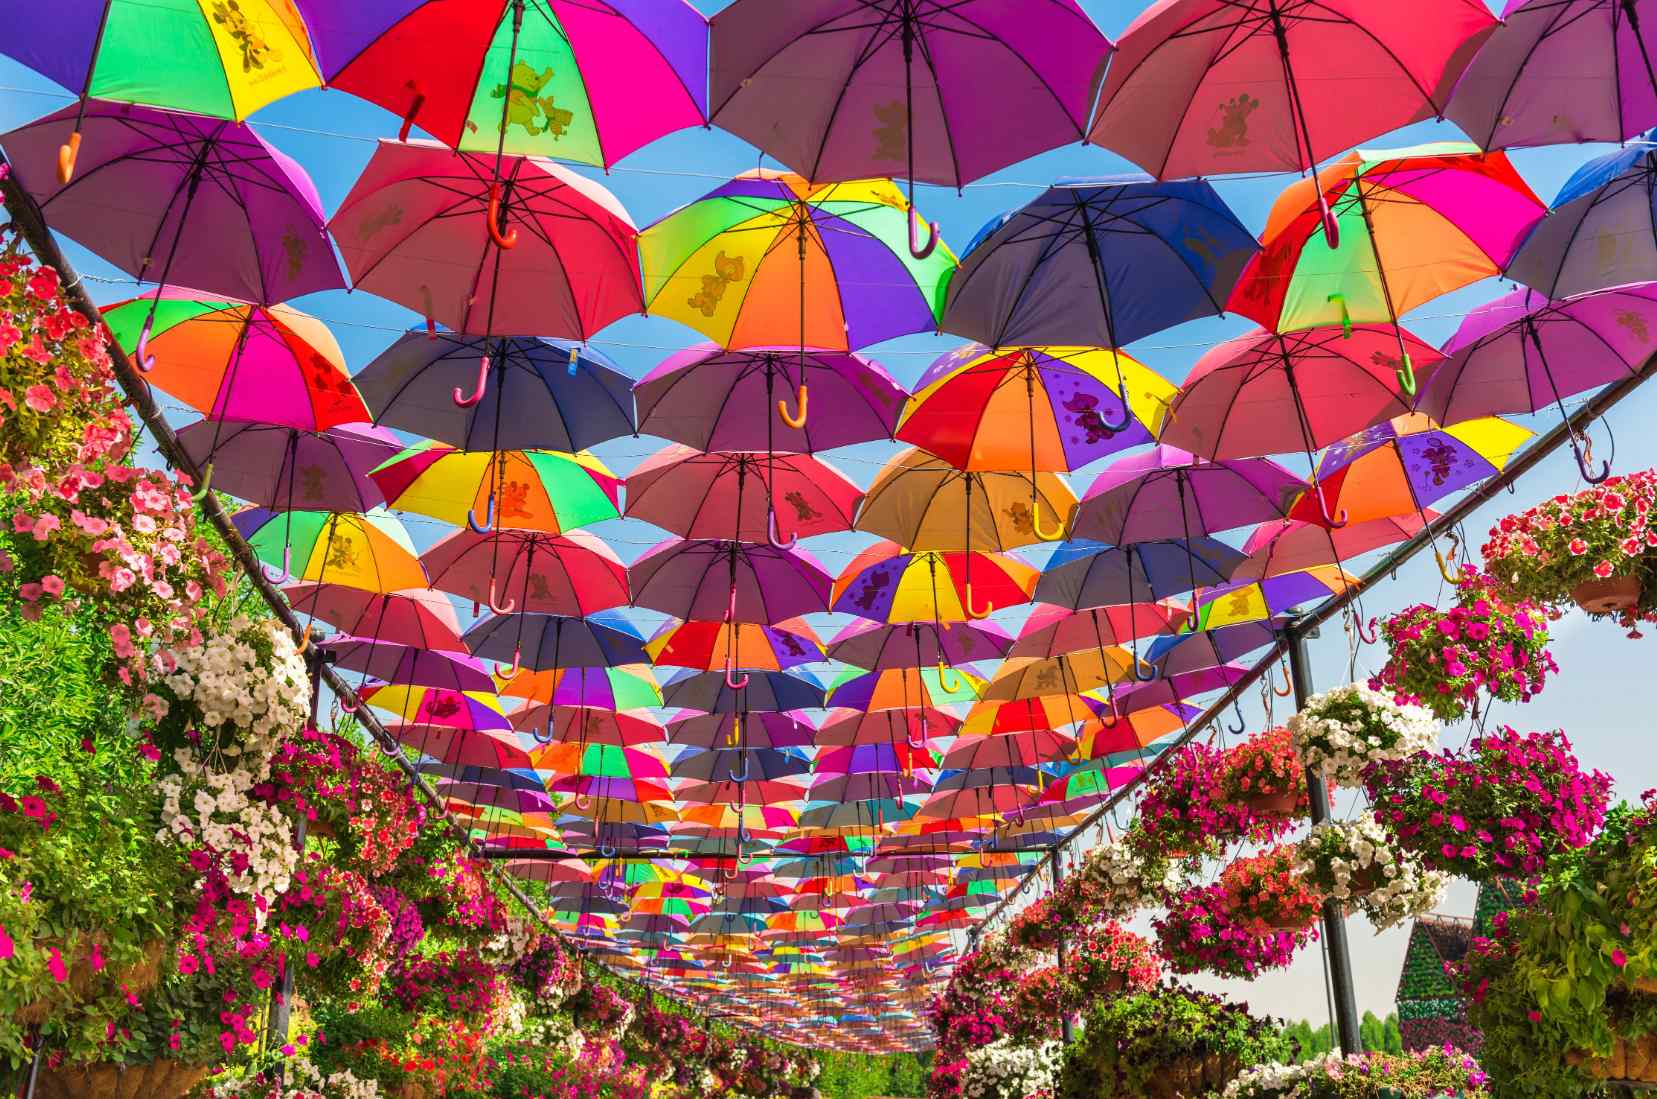 Dubai Miracle Garden boasts creative umbrella passages with upside-down umbrella ceilings and flower-adorned bands, creating a vibrant, rainforest-inspired atmosphere.